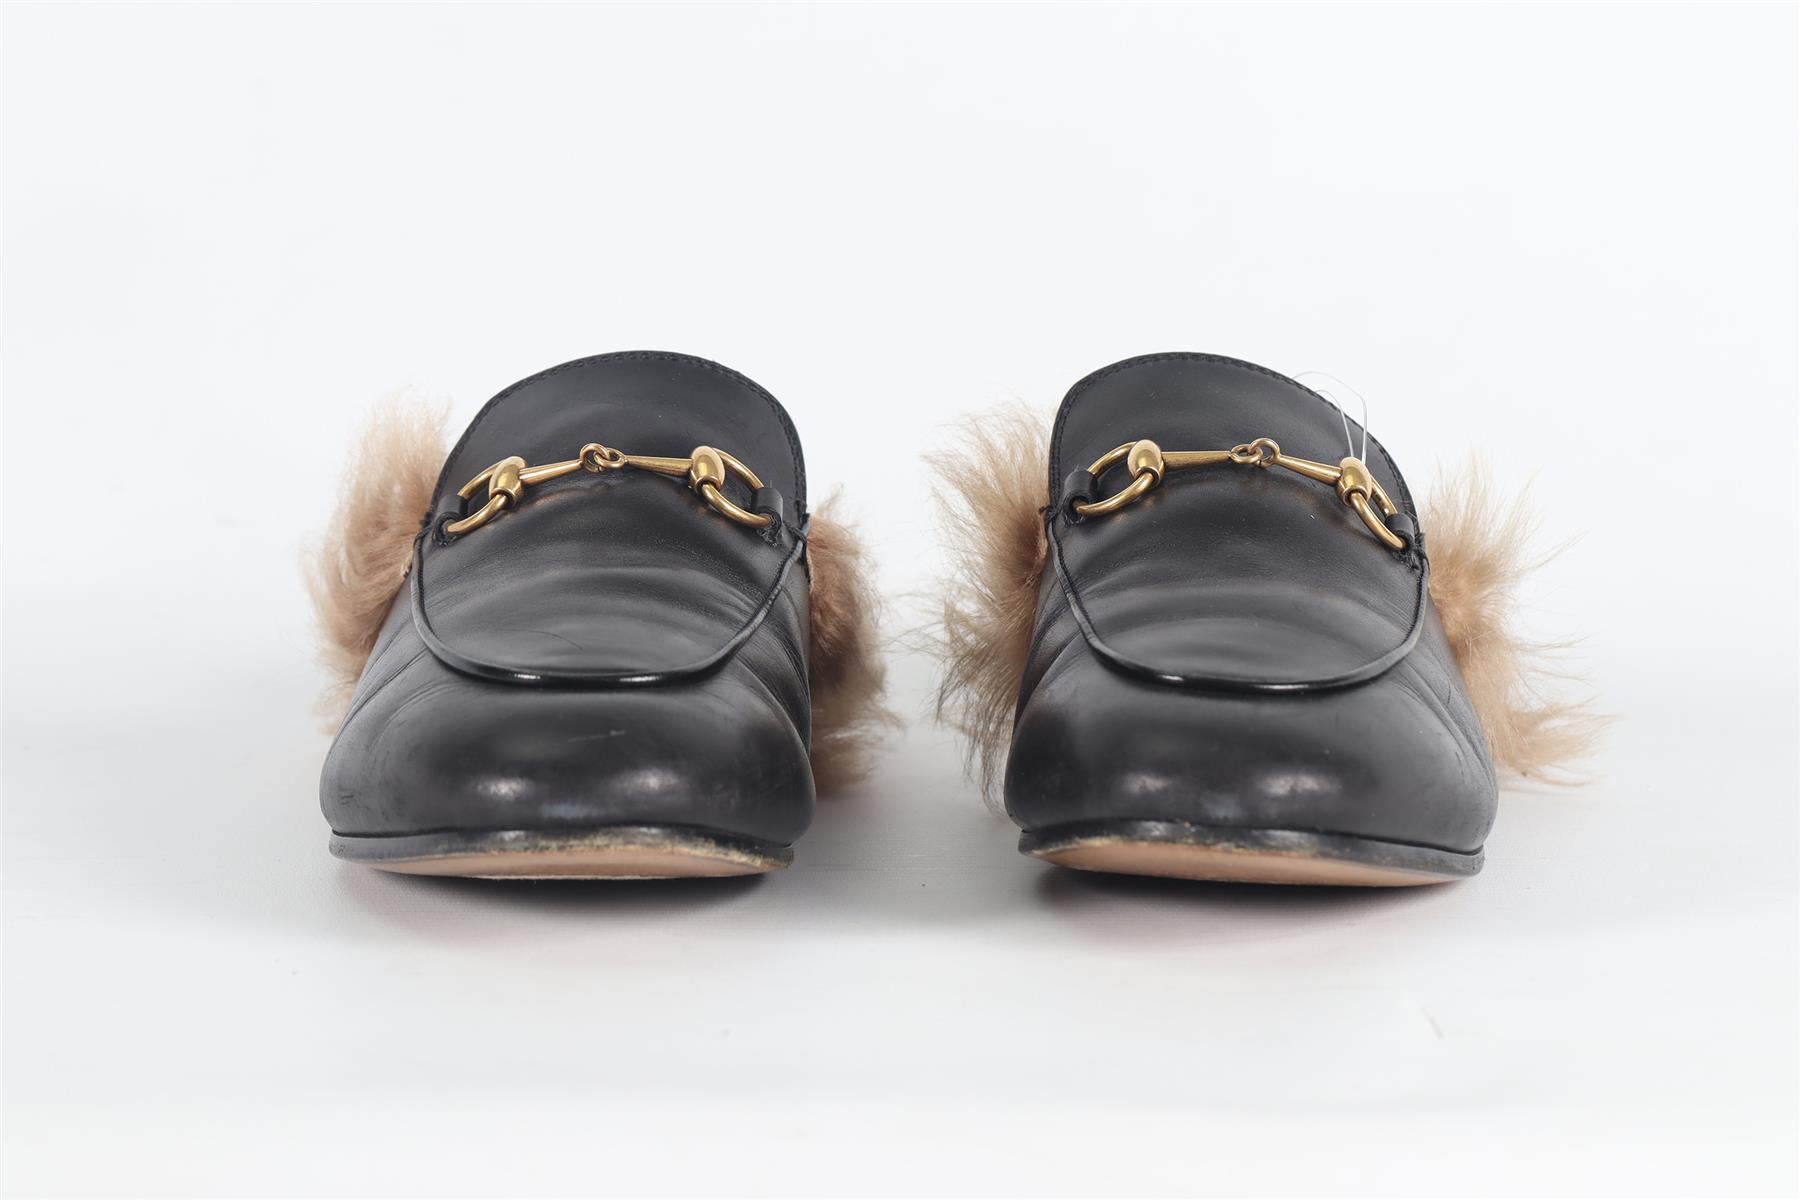 GUCCI PRINCETON SHEARLING AND LEATHER SLIPPERS EU 39 UK 6 US 9